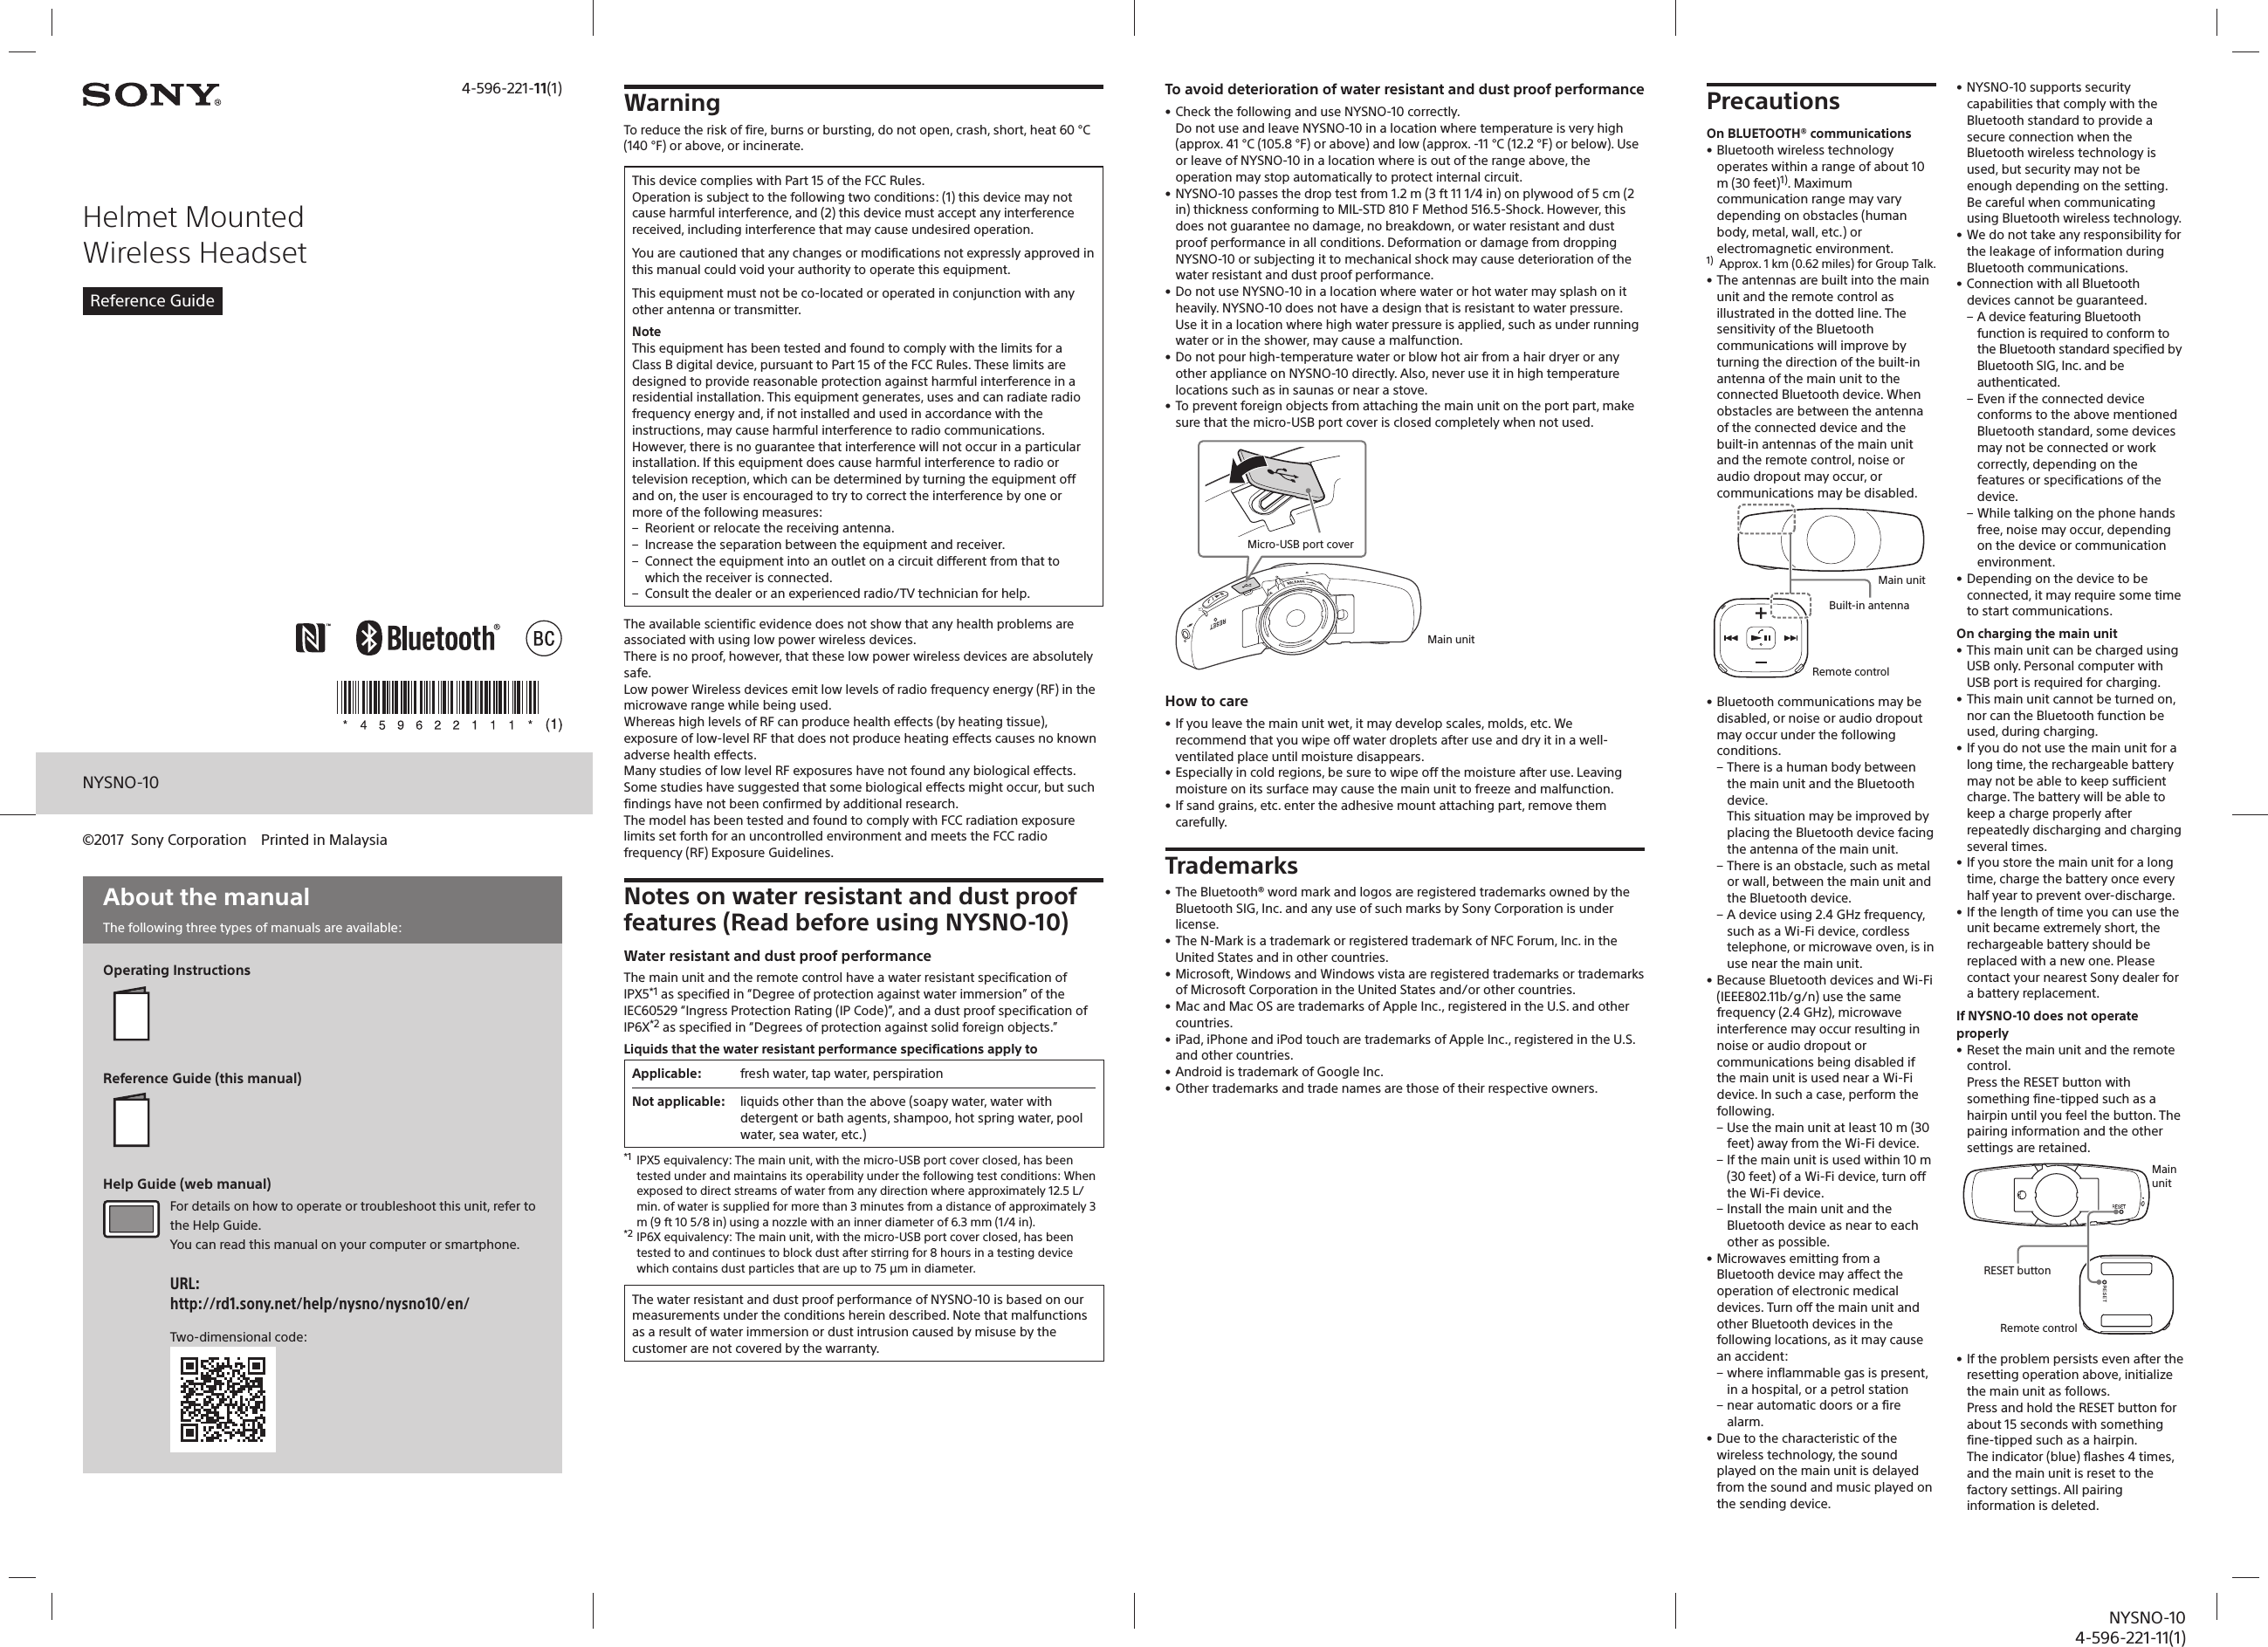 NYSNO-104-596-221-11(1)NYSNO-10Helmet Mounted Wireless HeadsetReference Guide4-596-221-11(1)©2017  Sony Corporation  Printed in MalaysiaAbout the manualThe following three types of manuals are available: Operating InstructionsReference Guide (this manual)Help Guide (web manual)For details on how to operate or troubleshoot this unit, refer to the Help Guide.You can read this manual on your computer or smartphone.URL:http://rd1.sony.net/help/nysno/nysno10/en/Two-dimensional code: WarningTo reduce the risk of fire, burns or bursting, do not open, crash, short, heat 60°C (140°F) or above, or incinerate.This device complies with Part 15 of the FCC Rules.Operation is subject to the following two conditions: (1) this device may not cause harmful interference, and (2) this device must accept any interference received, including interference that may cause undesired operation.You are cautioned that any changes or modifications not expressly approved in this manual could void your authority to operate this equipment.This equipment must not be co-located or operated in conjunction with any other antenna or transmitter.NoteThis equipment has been tested and found to comply with the limits for a Class B digital device, pursuant to Part 15 of the FCC Rules. These limits are designed to provide reasonable protection against harmful interference in a residential installation. This equipment generates, uses and can radiate radio frequency energy and, if not installed and used in accordance with the instructions, may cause harmful interference to radio communications.However, there is no guarantee that interference will not occur in a particular installation. If this equipment does cause harmful interference to radio or television reception, which can be determined by turning the equipment off and on, the user is encouraged to try to correct the interference by one or more of the following measures: – Reorient or relocate the receiving antenna. – Increase the separation between the equipment and receiver. – Connect the equipment into an outlet on a circuit different from that to which the receiver is connected. – Consult the dealer or an experienced radio/TV technician for help.The available scientific evidence does not show that any health problems are associated with using low power wireless devices. There is no proof, however, that these low power wireless devices are absolutely safe. Low power Wireless devices emit low levels of radio frequency energy (RF) in the microwave range while being used. Whereas high levels of RF can produce health effects (by heating tissue), exposure of low-level RF that does not produce heating effects causes no known adverse health effects. Many studies of low level RF exposures have not found any biological effects. Some studies have suggested that some biological effects might occur, but such findings have not been confirmed by additional research. The model has been tested and found to comply with FCC radiation exposure limits set forth for an uncontrolled environment and meets the FCC radio frequency (RF) Exposure Guidelines.Notes on water resistant and dust proof features (Read before using NYSNO-10)Water resistant and dust proof performanceThe main unit and the remote control have a water resistant specification of IPX5*1 as specified in “Degree of protection against water immersion” of the IEC60529 “Ingress Protection Rating (IP Code)”, and a dust proof specification of IP6X*2 as specified in “Degrees of protection against solid foreign objects.” Liquids that the water resistant performance specifications apply toApplicable: fresh water, tap water, perspirationNot applicable: liquids other than the above (soapy water, water with detergent or bath agents, shampoo, hot spring water, pool water, sea water, etc.)*1  IPX5 equivalency: The main unit, with the micro-USB port cover closed, has been tested under and maintains its operability under the following test conditions: When exposed to direct streams of water from any direction where approximately 12.5 L/min. of water is supplied for more than 3 minutes from a distance of approximately 3 m (9 ft 10 5/8 in) using a nozzle with an inner diameter of 6.3 mm (1/4 in).*2 IP6X equivalency: The main unit, with the micro-USB port cover closed, has been tested to and continues to block dust after stirring for 8 hours in a testing device which contains dust particles that are up to 75 μm in diameter.The water resistant and dust proof performance of NYSNO-10 is based on our measurements under the conditions herein described. Note that malfunctions as a result of water immersion or dust intrusion caused by misuse by the customer are not covered by the warranty.To avoid deterioration of water resistant and dust proof performance• Check the following and use NYSNO-10 correctly.Do not use and leave NYSNO-10 in a location where temperature is very high (approx. 41 °C (105.8 °F) or above) and low (approx. -11 °C (12.2 °F) or below). Use or leave of NYSNO-10 in a location where is out of the range above, the operation may stop automatically to protect internal circuit.• NYSNO-10 passes the drop test from 1.2 m (3 ft 11 1/4 in) on plywood of 5 cm (2 in) thickness conforming to MIL-STD 810 F Method 516.5-Shock. However, this does not guarantee no damage, no breakdown, or water resistant and dust proof performance in all conditions. Deformation or damage from dropping NYSNO-10 or subjecting it to mechanical shock may cause deterioration of the water resistant and dust proof performance.• Do not use NYSNO-10 in a location where water or hot water may splash on it heavily. NYSNO-10 does not have a design that is resistant to water pressure. Use it in a location where high water pressure is applied, such as under running water or in the shower, may cause a malfunction.• Do not pour high-temperature water or blow hot air from a hair dryer or any other appliance on NYSNO-10 directly. Also, never use it in high temperature locations such as in saunas or near a stove.• To prevent foreign objects from attaching the main unit on the port part, make sure that the micro-USB port cover is closed completely when not used.Micro-USB port coverMain unitHow to care• If you leave the main unit wet, it may develop scales, molds, etc. We recommend that you wipe off water droplets after use and dry it in a well-ventilated place until moisture disappears.• Especially in cold regions, be sure to wipe off the moisture after use. Leaving moisture on its surface may cause the main unit to freeze and malfunction.• If sand grains, etc. enter the adhesive mount attaching part, remove them carefully.Trademarks• The Bluetooth® word mark and logos are registered trademarks owned by the Bluetooth SIG, Inc. and any use of such marks by Sony Corporation is under license.• The N-Mark is a trademark or registered trademark of NFC Forum, Inc. in the United States and in other countries.• Microsoft, Windows and Windows vista are registered trademarks or trademarks of Microsoft Corporation in the United States and/or other countries.• Mac and Mac OS are trademarks of Apple Inc., registered in the U.S. and other countries.• iPad, iPhone and iPod touch are trademarks of Apple Inc., registered in the U.S. and other countries.• Android is trademark of Google Inc.• Other trademarks and trade names are those of their respective owners.PrecautionsOn BLUETOOTH® communications• Bluetooth wireless technology operates within a range of about 10 m (30 feet)1). Maximum communication range may vary depending on obstacles (human body, metal, wall, etc.) or electromagnetic environment.1)  Approx. 1 km (0.62 miles) for Group Talk.• The antennas are built into the main unit and the remote control as illustrated in the dotted line. The sensitivity of the Bluetooth communications will improve by turning the direction of the built-in antenna of the main unit to the connected Bluetooth device. When obstacles are between the antenna of the connected device and the built-in antennas of the main unit and the remote control, noise or audio dropout may occur, or communications may be disabled.Built-in antennaMain unitRemote control• Bluetooth communications may be disabled, or noise or audio dropout may occur under the following conditions. – There is a human body between the main unit and the Bluetooth device.This situation may be improved by placing the Bluetooth device facing the antenna of the main unit. – There is an obstacle, such as metal or wall, between the main unit and the Bluetooth device. – A device using 2.4 GHz frequency, such as a Wi-Fi device, cordless telephone, or microwave oven, is in use near the main unit.• Because Bluetooth devices and Wi-Fi (IEEE802.11b/g/n) use the same frequency (2.4 GHz), microwave interference may occur resulting in noise or audio dropout or communications being disabled if the main unit is used near a Wi-Fi device. In such a case, perform the following. – Use the main unit at least 10 m (30 feet) away from the Wi-Fi device. – If the main unit is used within 10 m (30 feet) of a Wi-Fi device, turn off the Wi-Fi device. – Install the main unit and the Bluetooth device as near to each other as possible.• Microwaves emitting from a Bluetooth device may affect the operation of electronic medical devices. Turn off the main unit and other Bluetooth devices in the following locations, as it may cause an accident: – where inflammable gas is present, in a hospital, or a petrol station – near automatic doors or a fire alarm.• Due to the characteristic of the wireless technology, the sound played on the main unit is delayed from the sound and music played on the sending device.• NYSNO-10 supports security capabilities that comply with the Bluetooth standard to provide a secure connection when the Bluetooth wireless technology is used, but security may not be enough depending on the setting. Be careful when communicating using Bluetooth wireless technology.• We do not take any responsibility for the leakage of information during Bluetooth communications.• Connection with all Bluetooth devices cannot be guaranteed. – A device featuring Bluetooth function is required to conform to the Bluetooth standard specified by Bluetooth SIG, Inc. and be authenticated. – Even if the connected device conforms to the above mentioned Bluetooth standard, some devices may not be connected or work correctly, depending on the features or specifications of the device. – While talking on the phone hands free, noise may occur, depending on the device or communication environment.• Depending on the device to be connected, it may require some time to start communications.On charging the main unit• This main unit can be charged using USB only. Personal computer with USB port is required for charging.• This main unit cannot be turned on, nor can the Bluetooth function be used, during charging.• If you do not use the main unit for a long time, the rechargeable battery may not be able to keep sufficient charge. The battery will be able to keep a charge properly after repeatedly discharging and charging several times.• If you store the main unit for a long time, charge the battery once every half year to prevent over-discharge.• If the length of time you can use the unit became extremely short, the rechargeable battery should be replaced with a new one. Please contact your nearest Sony dealer for a battery replacement.If NYSNO-10 does not operate properly• Reset the main unit and the remote control.Press the RESET button with something fine-tipped such as a hairpin until you feel the button. The pairing information and the other settings are retained.RESET buttonMain unitRemote control• If the problem persists even after the resetting operation above, initialize the main unit as follows.Press and hold the RESET button for about 15 seconds with something fine-tipped such as a hairpin. The indicator (blue) flashes 4 times, and the main unit is reset to the factory settings. All pairing information is deleted.